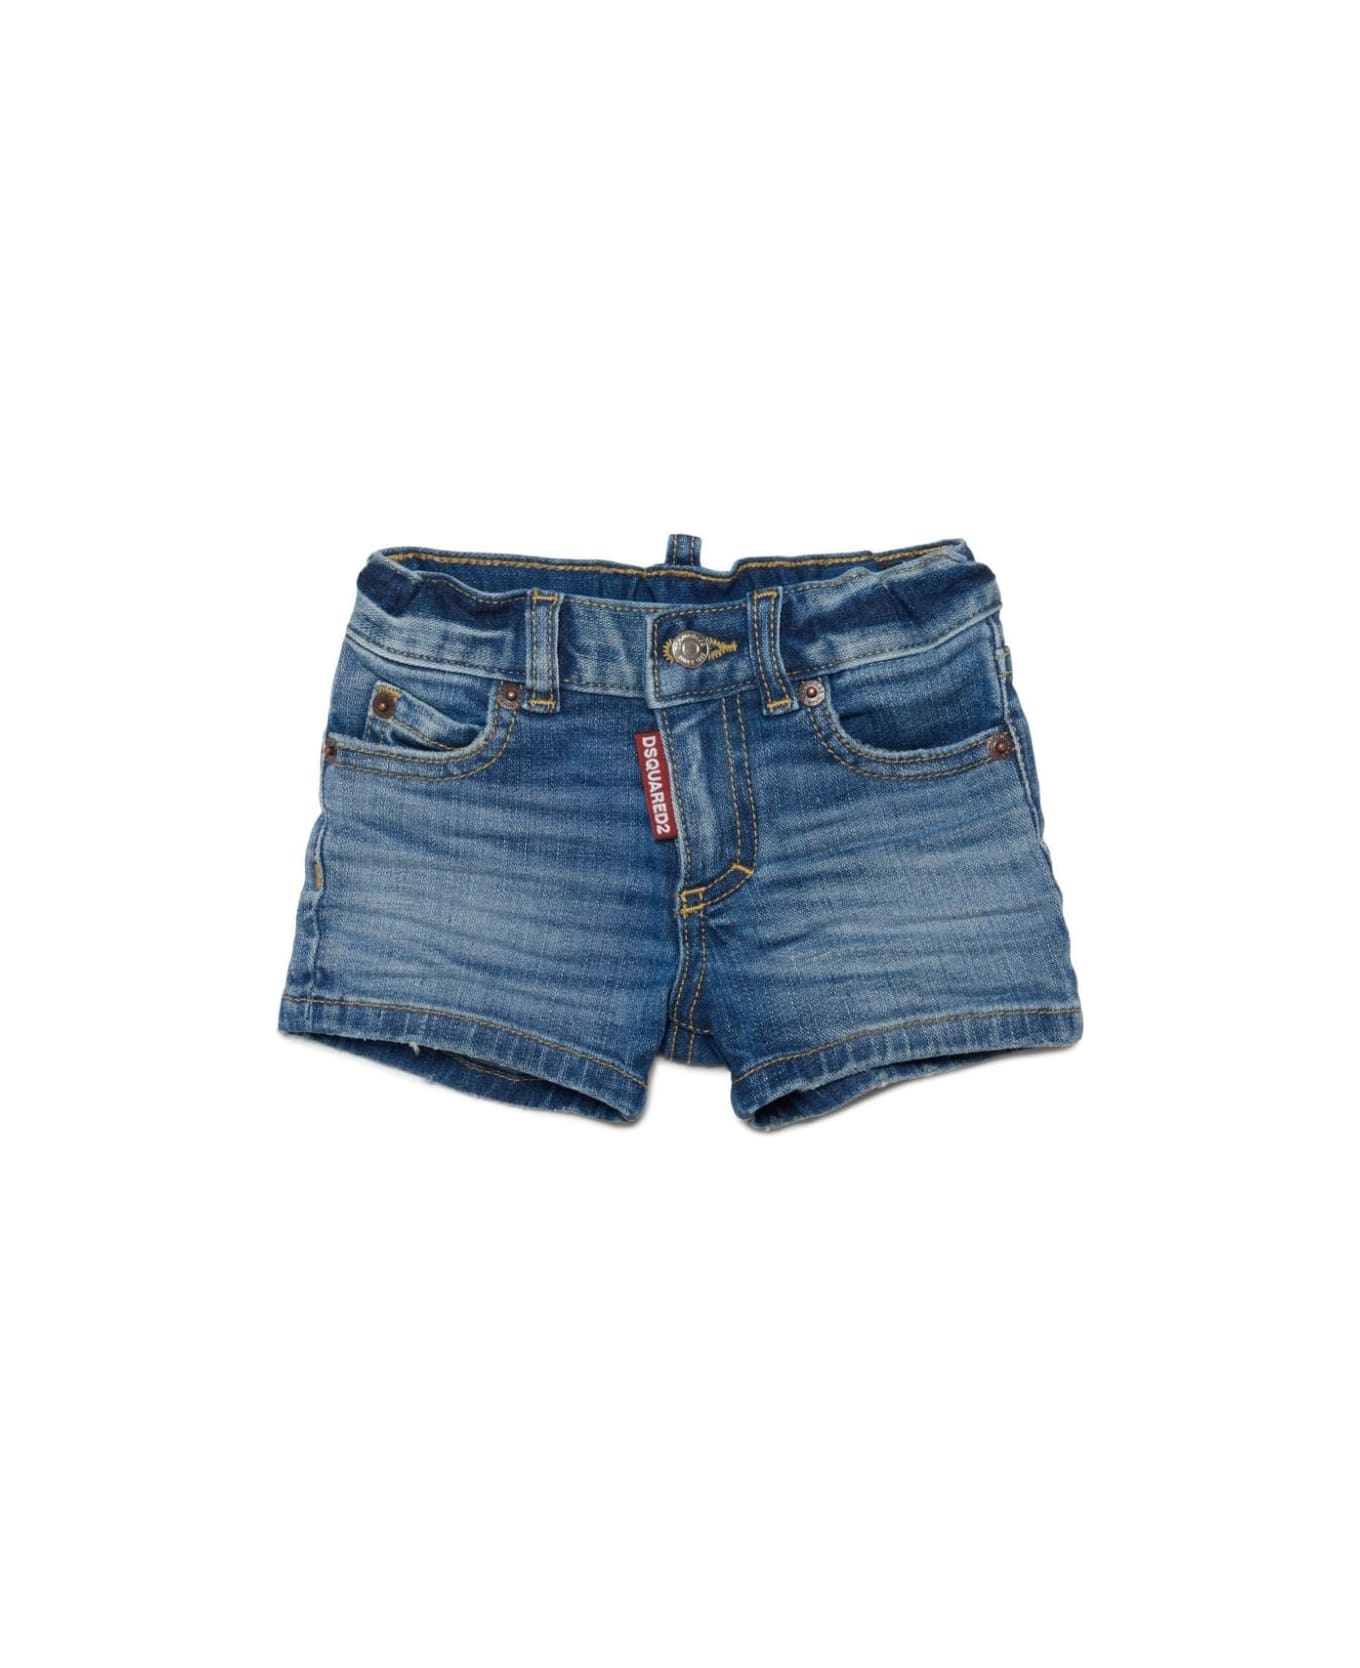 Dsquared2 Denim Shorts With Lived-in Effect - Blue ボトムス